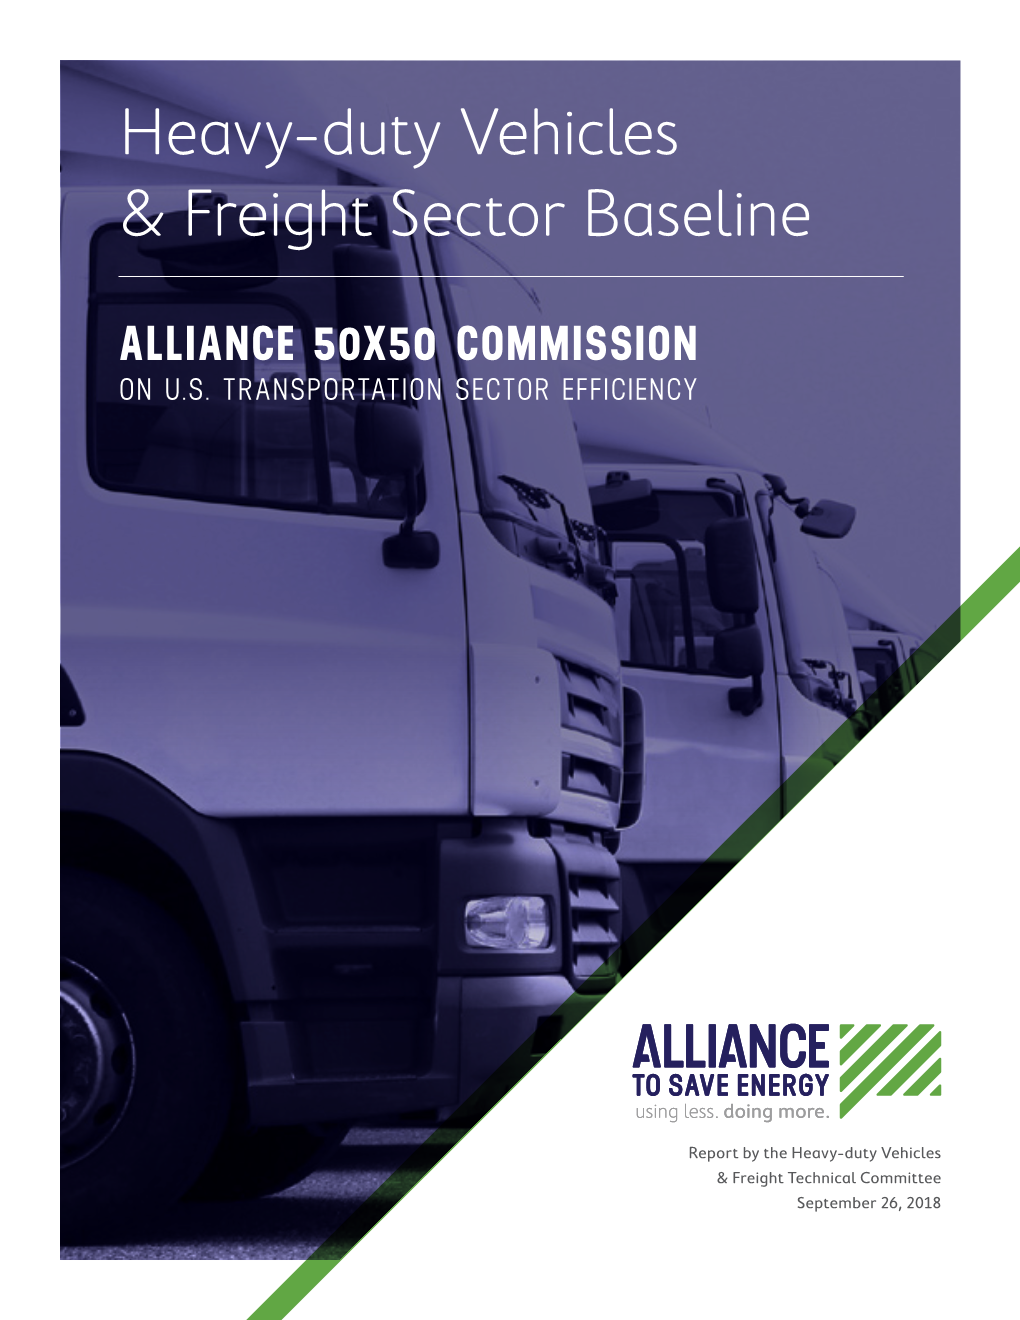 Heavy-Duty Vehicles & Freight Sector Baseline